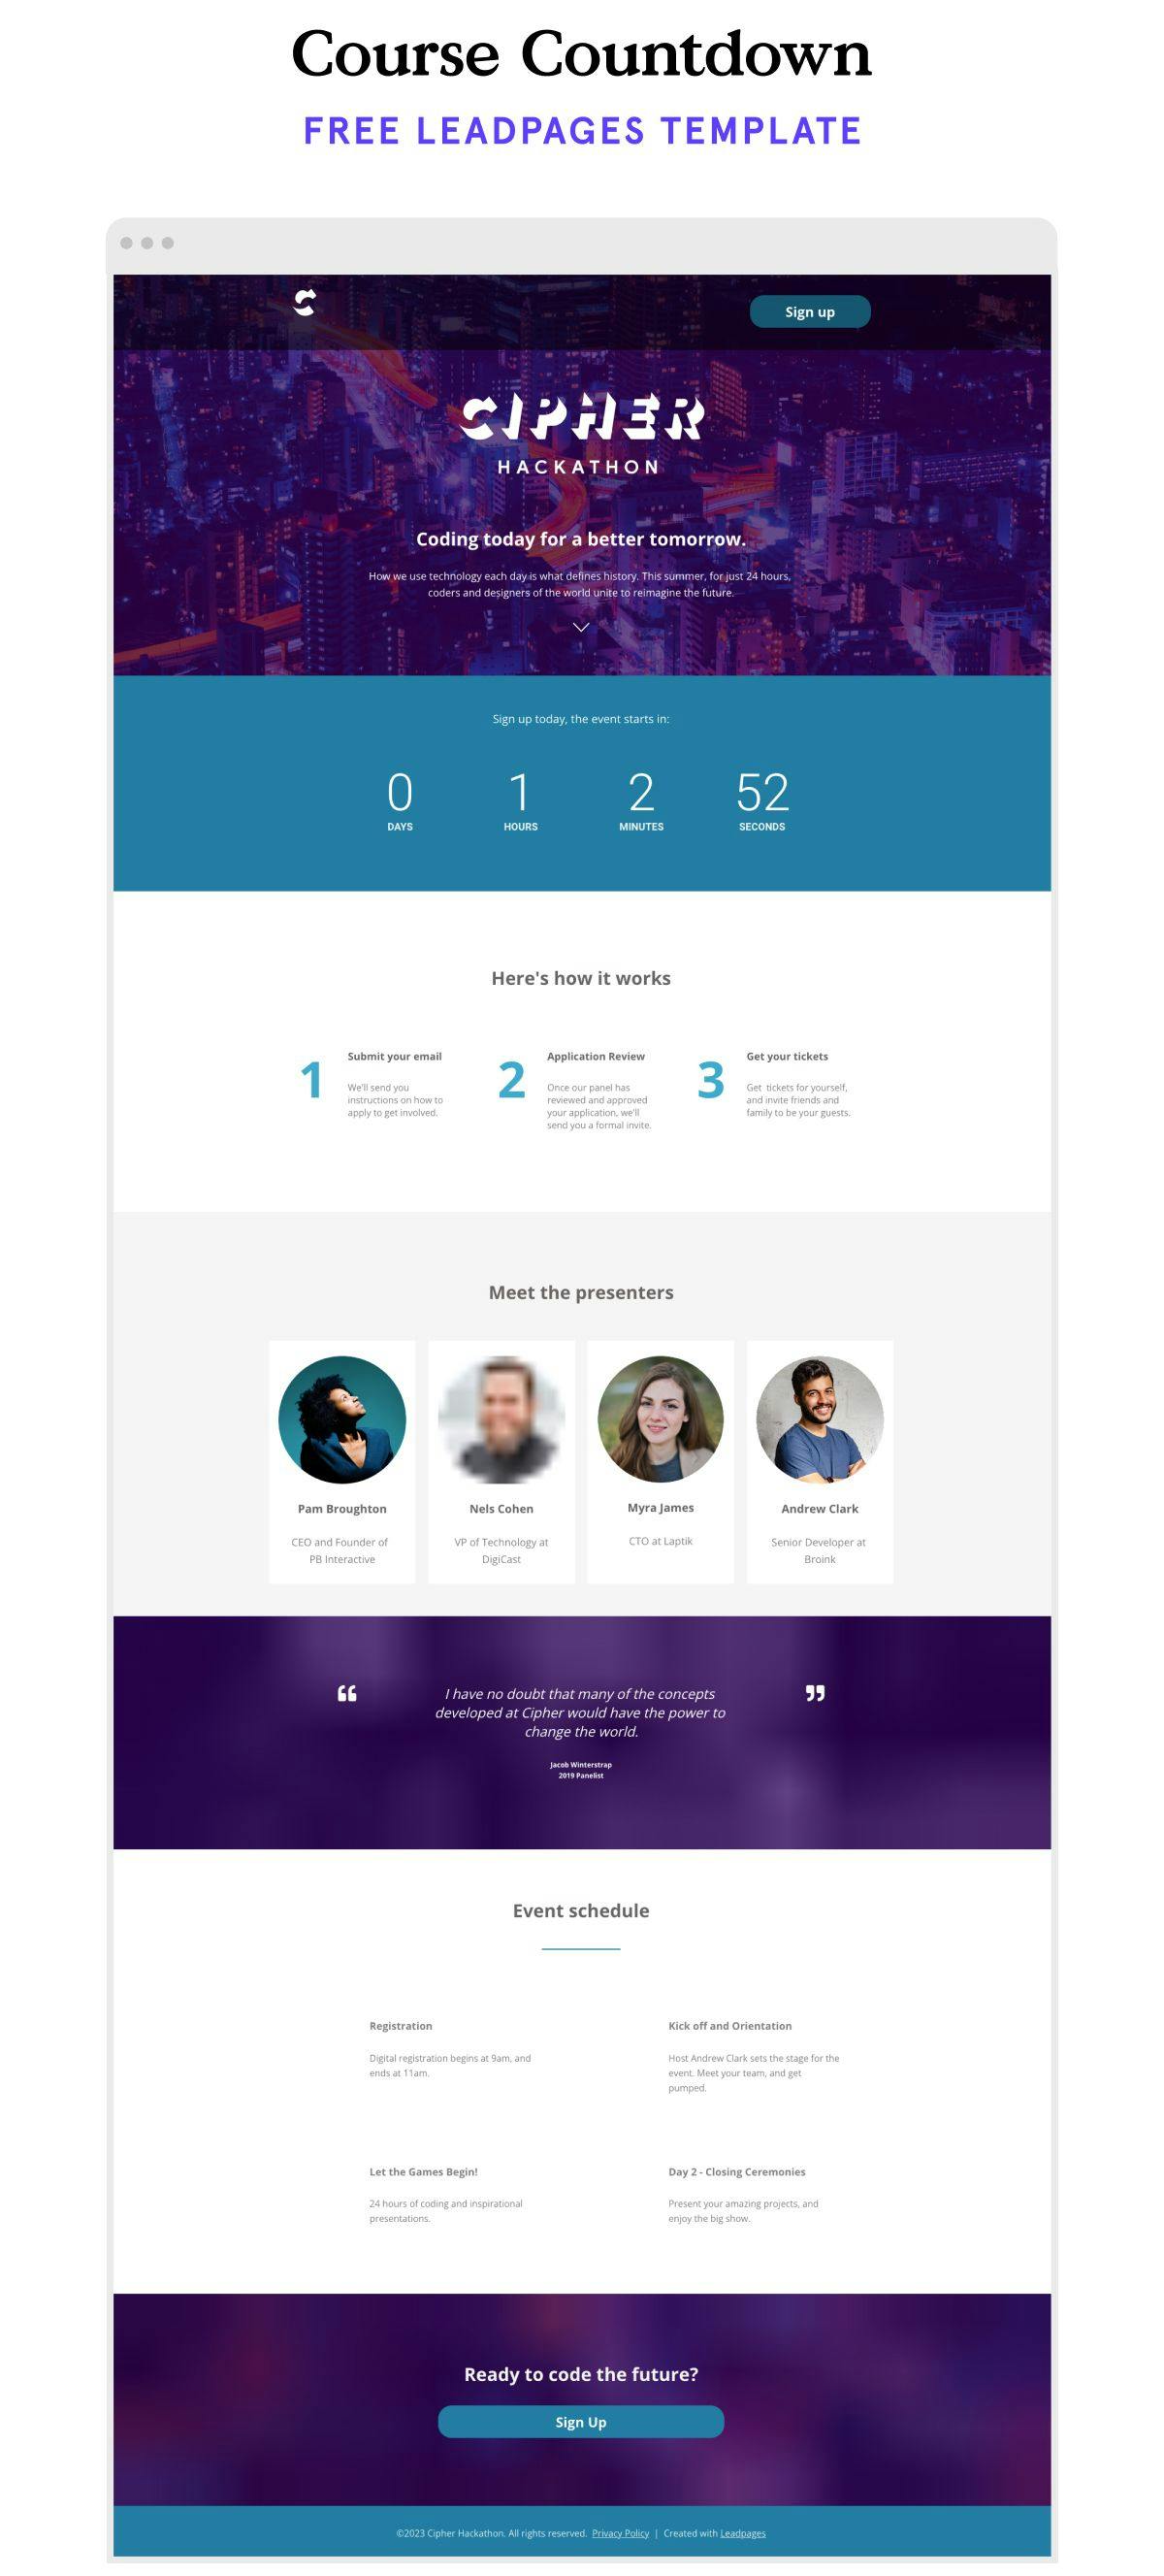 Countdown course landing page example